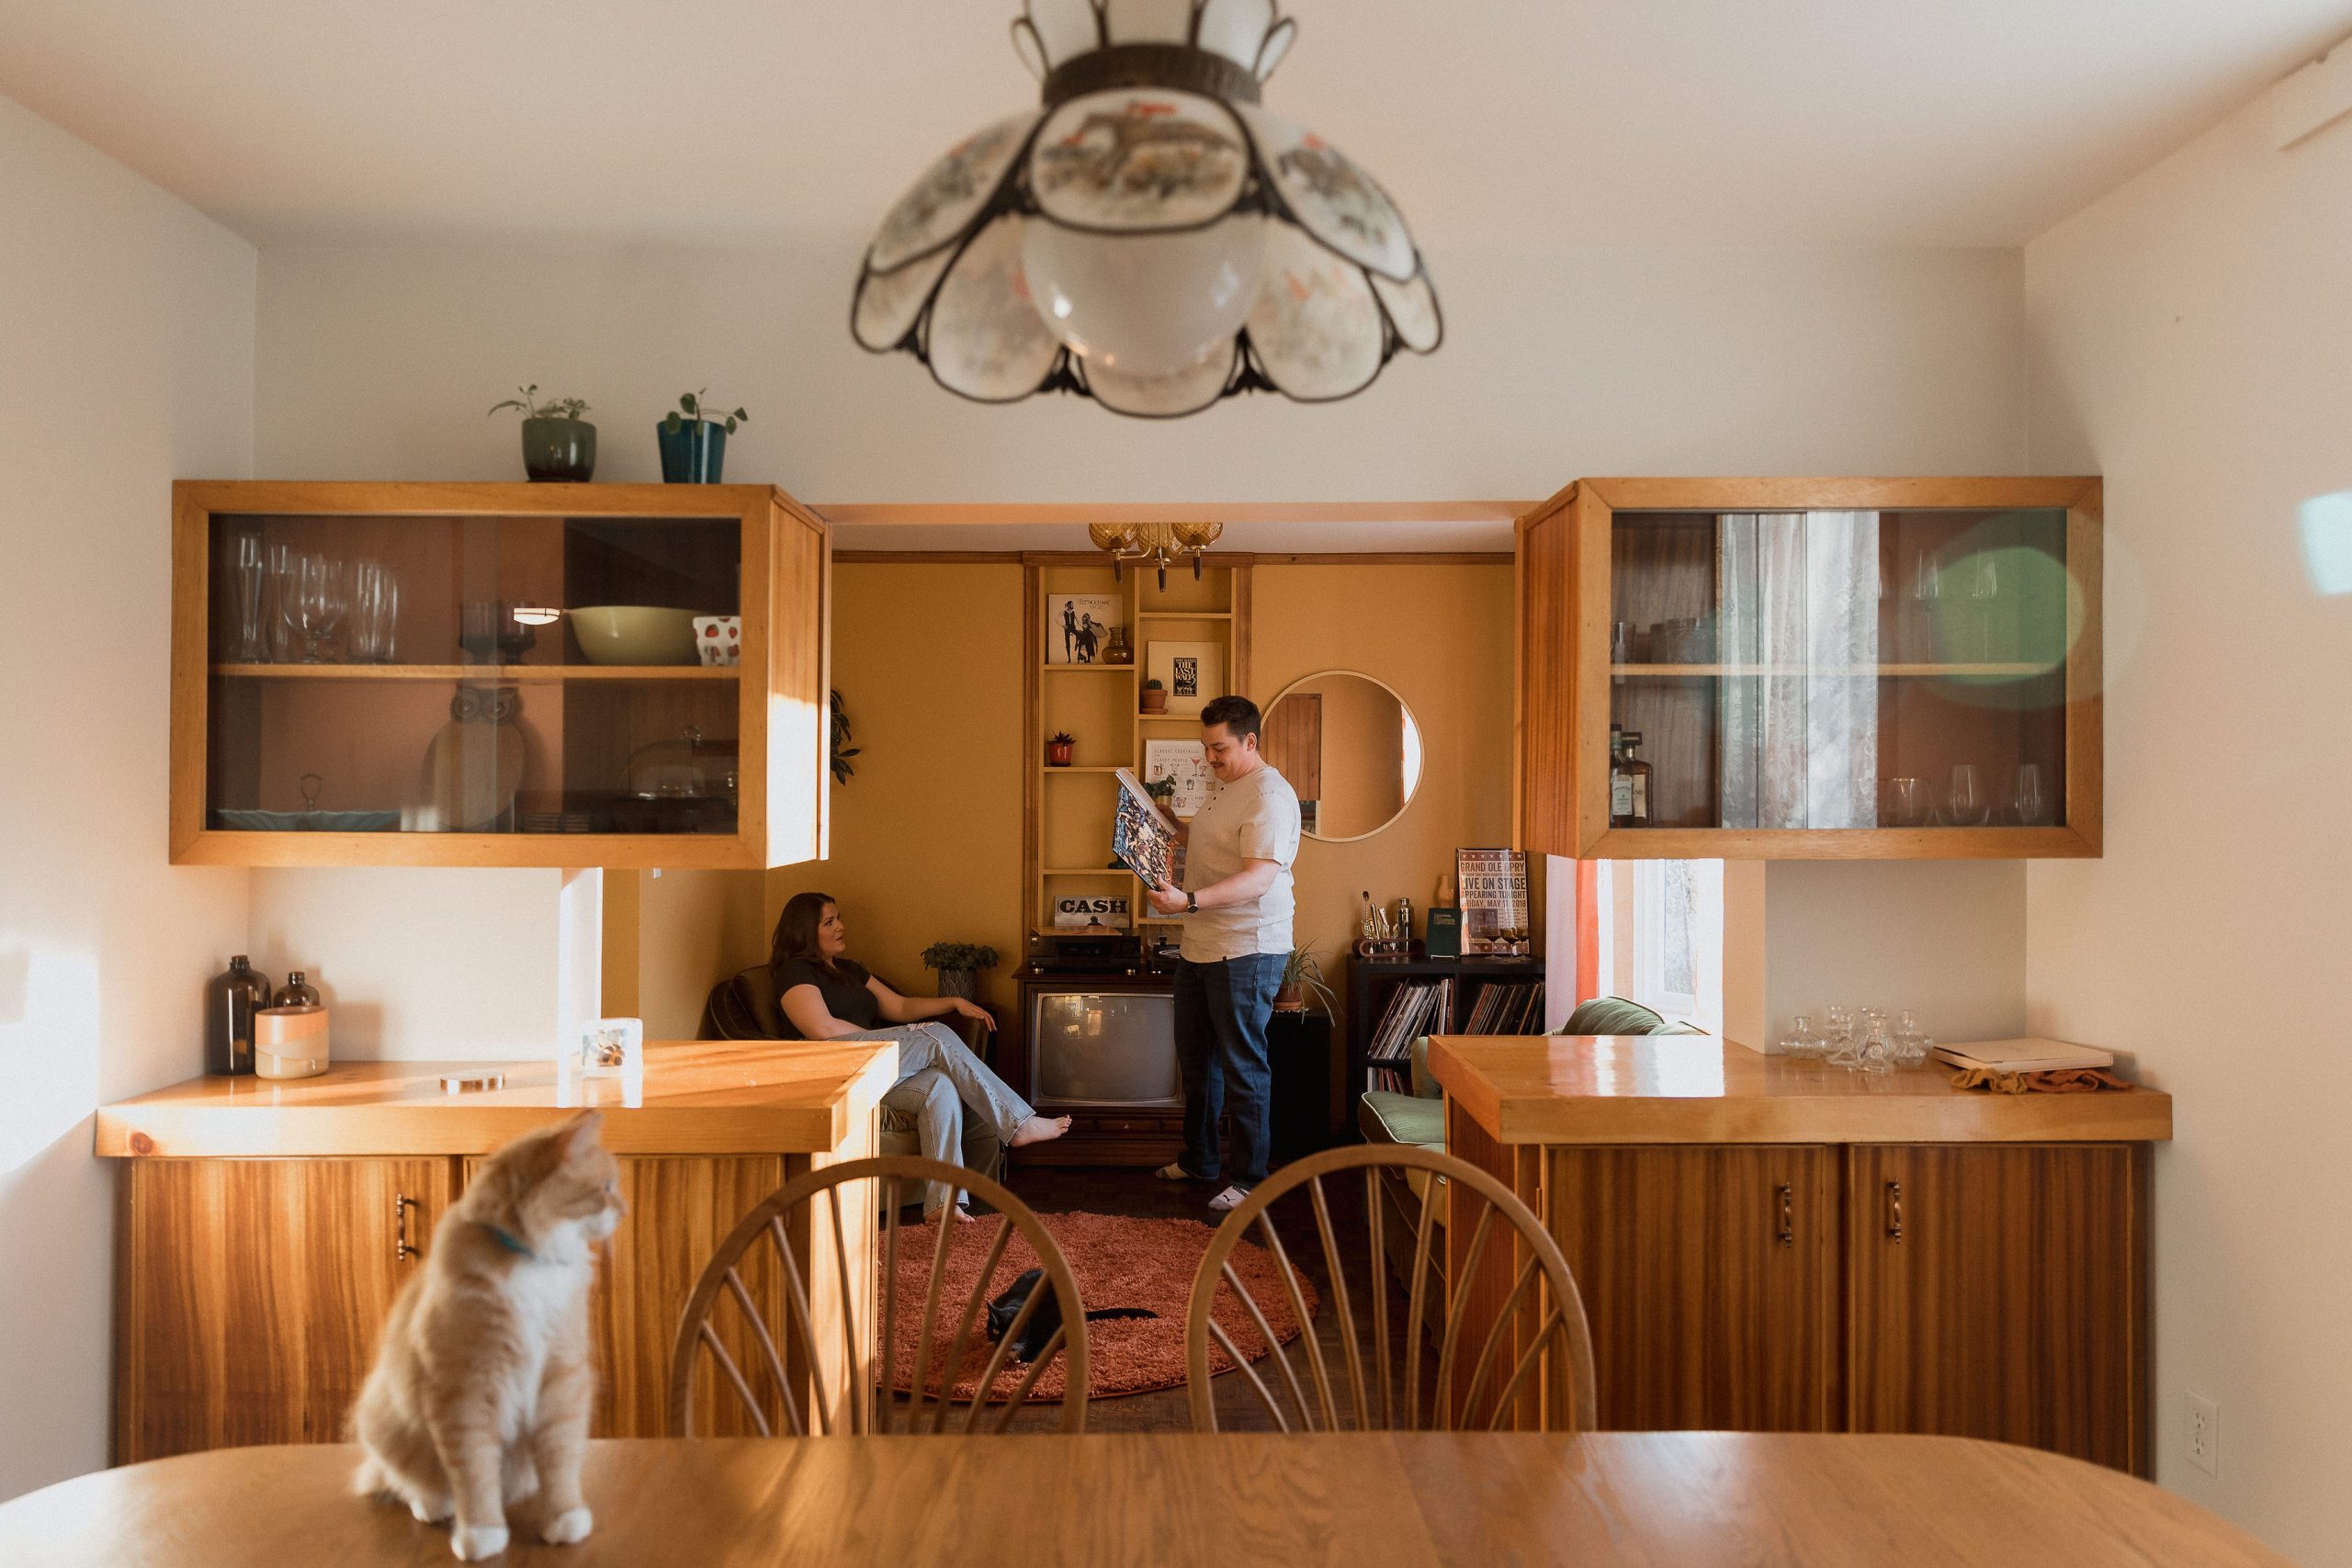 Orange living room retro style interiors in their home in rural Ontario, in-home engagement photos by Sonia V Photography